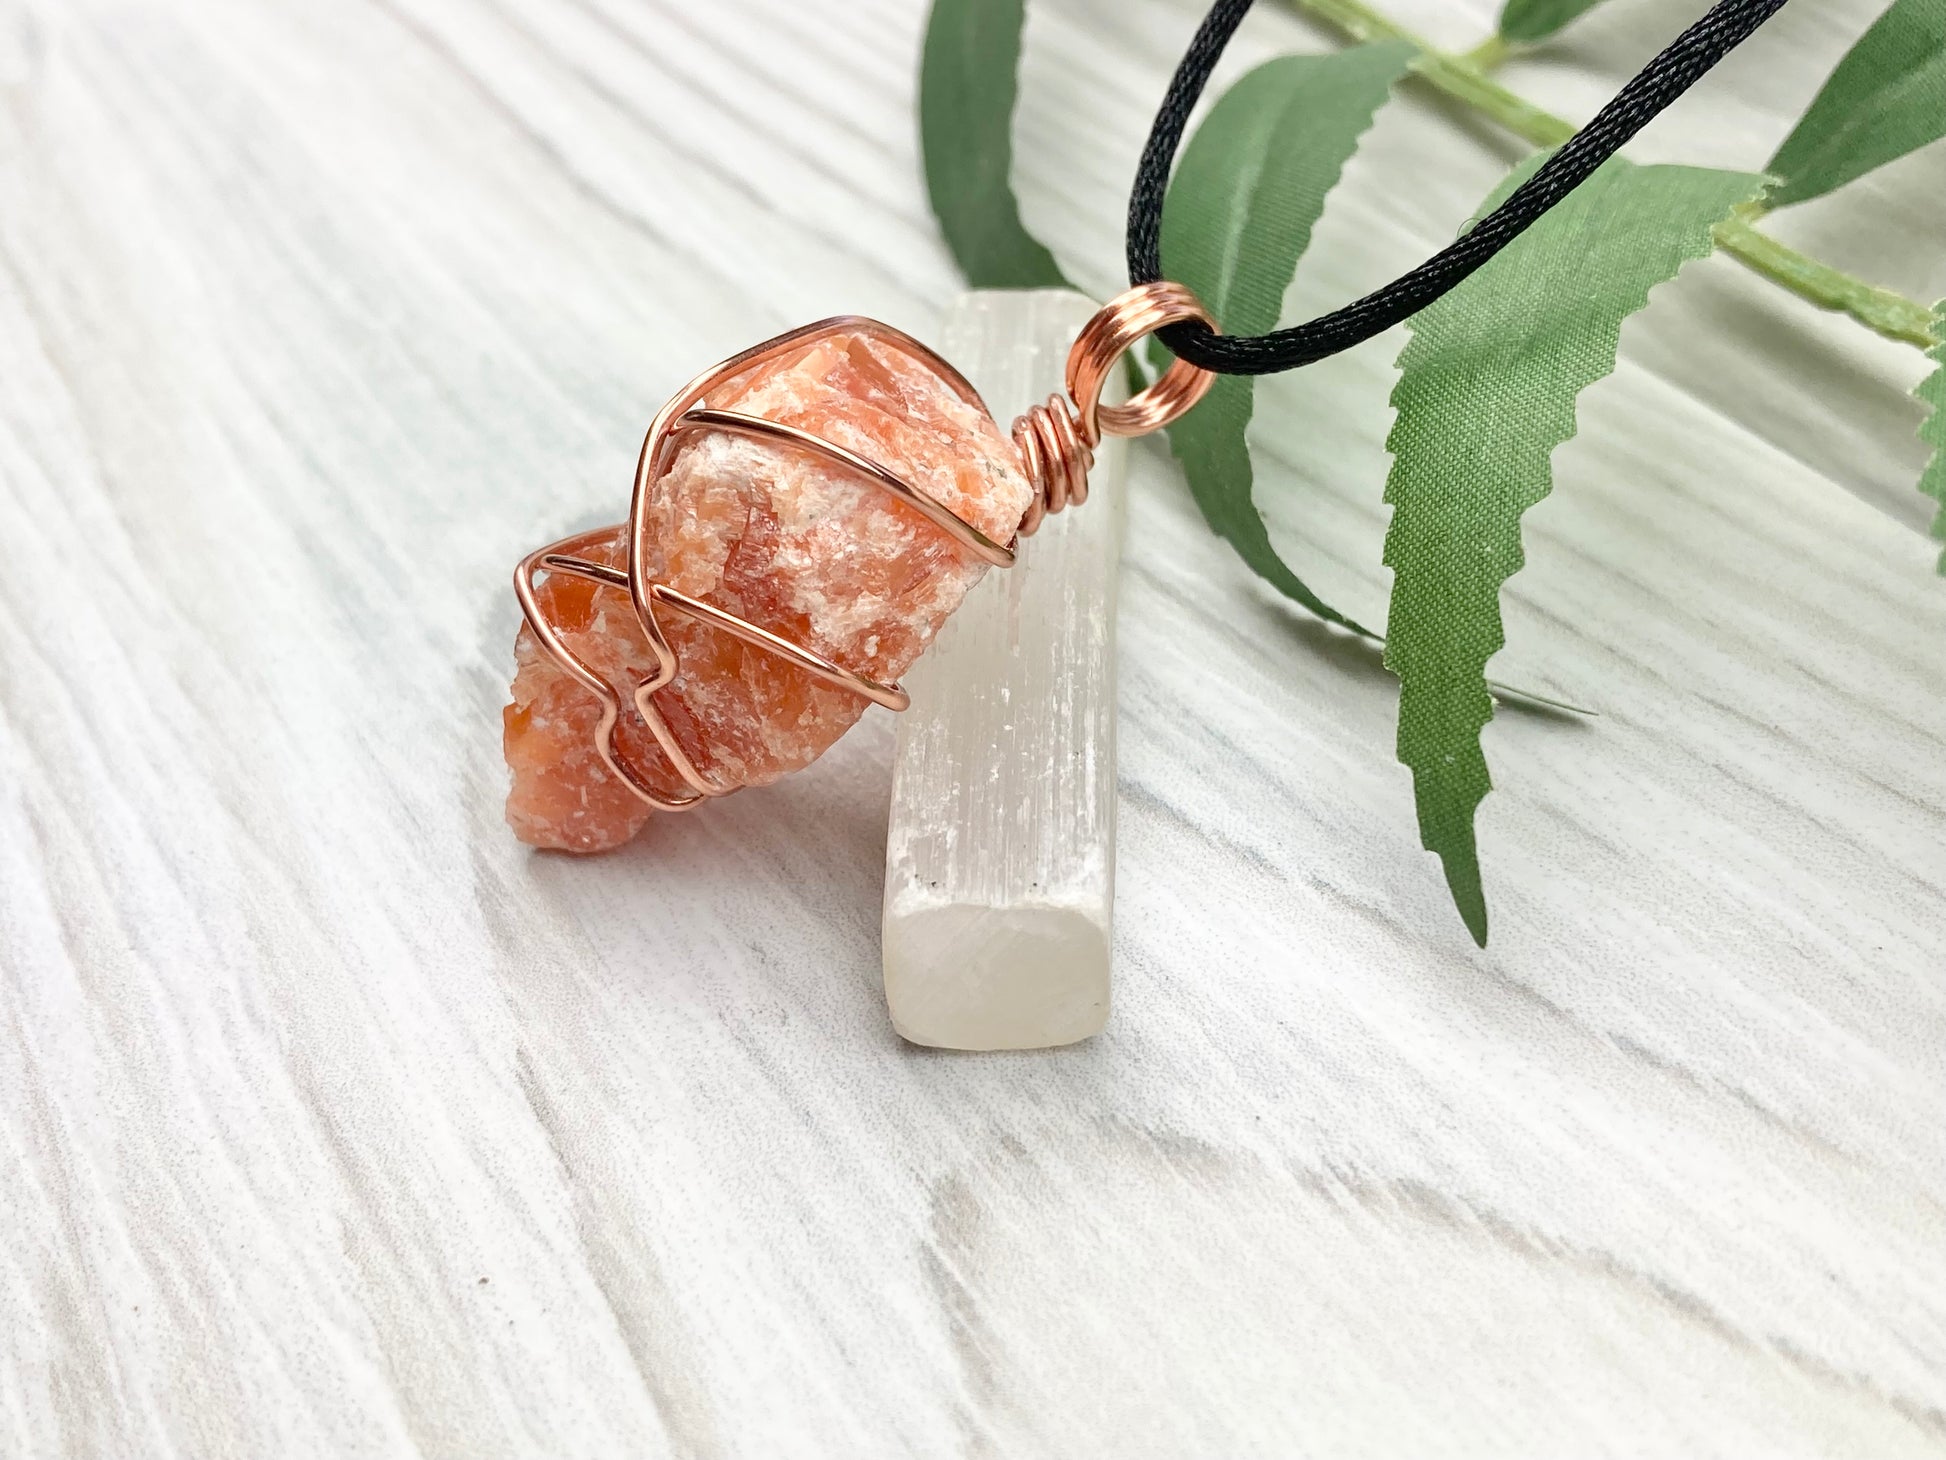 Orange Calcite Necklace. Raw Orange Calcite Crystal Wrapped With Copper Wire That Is Tarnish Resistant. Comes On A Black Necklace. Gemini Zodiac Stone Pendant. Handmade In Tennessee. Pagan Spiritual Jewelry.